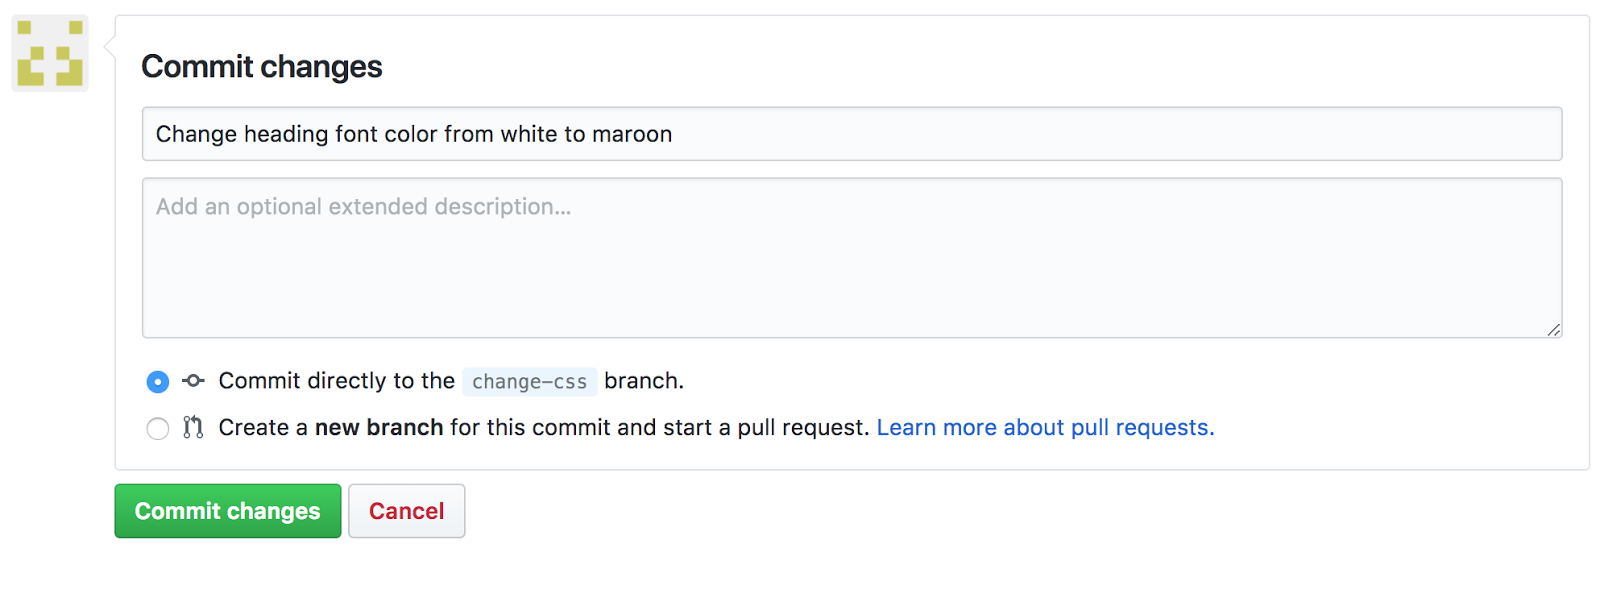 Committing changes to old change-css branch